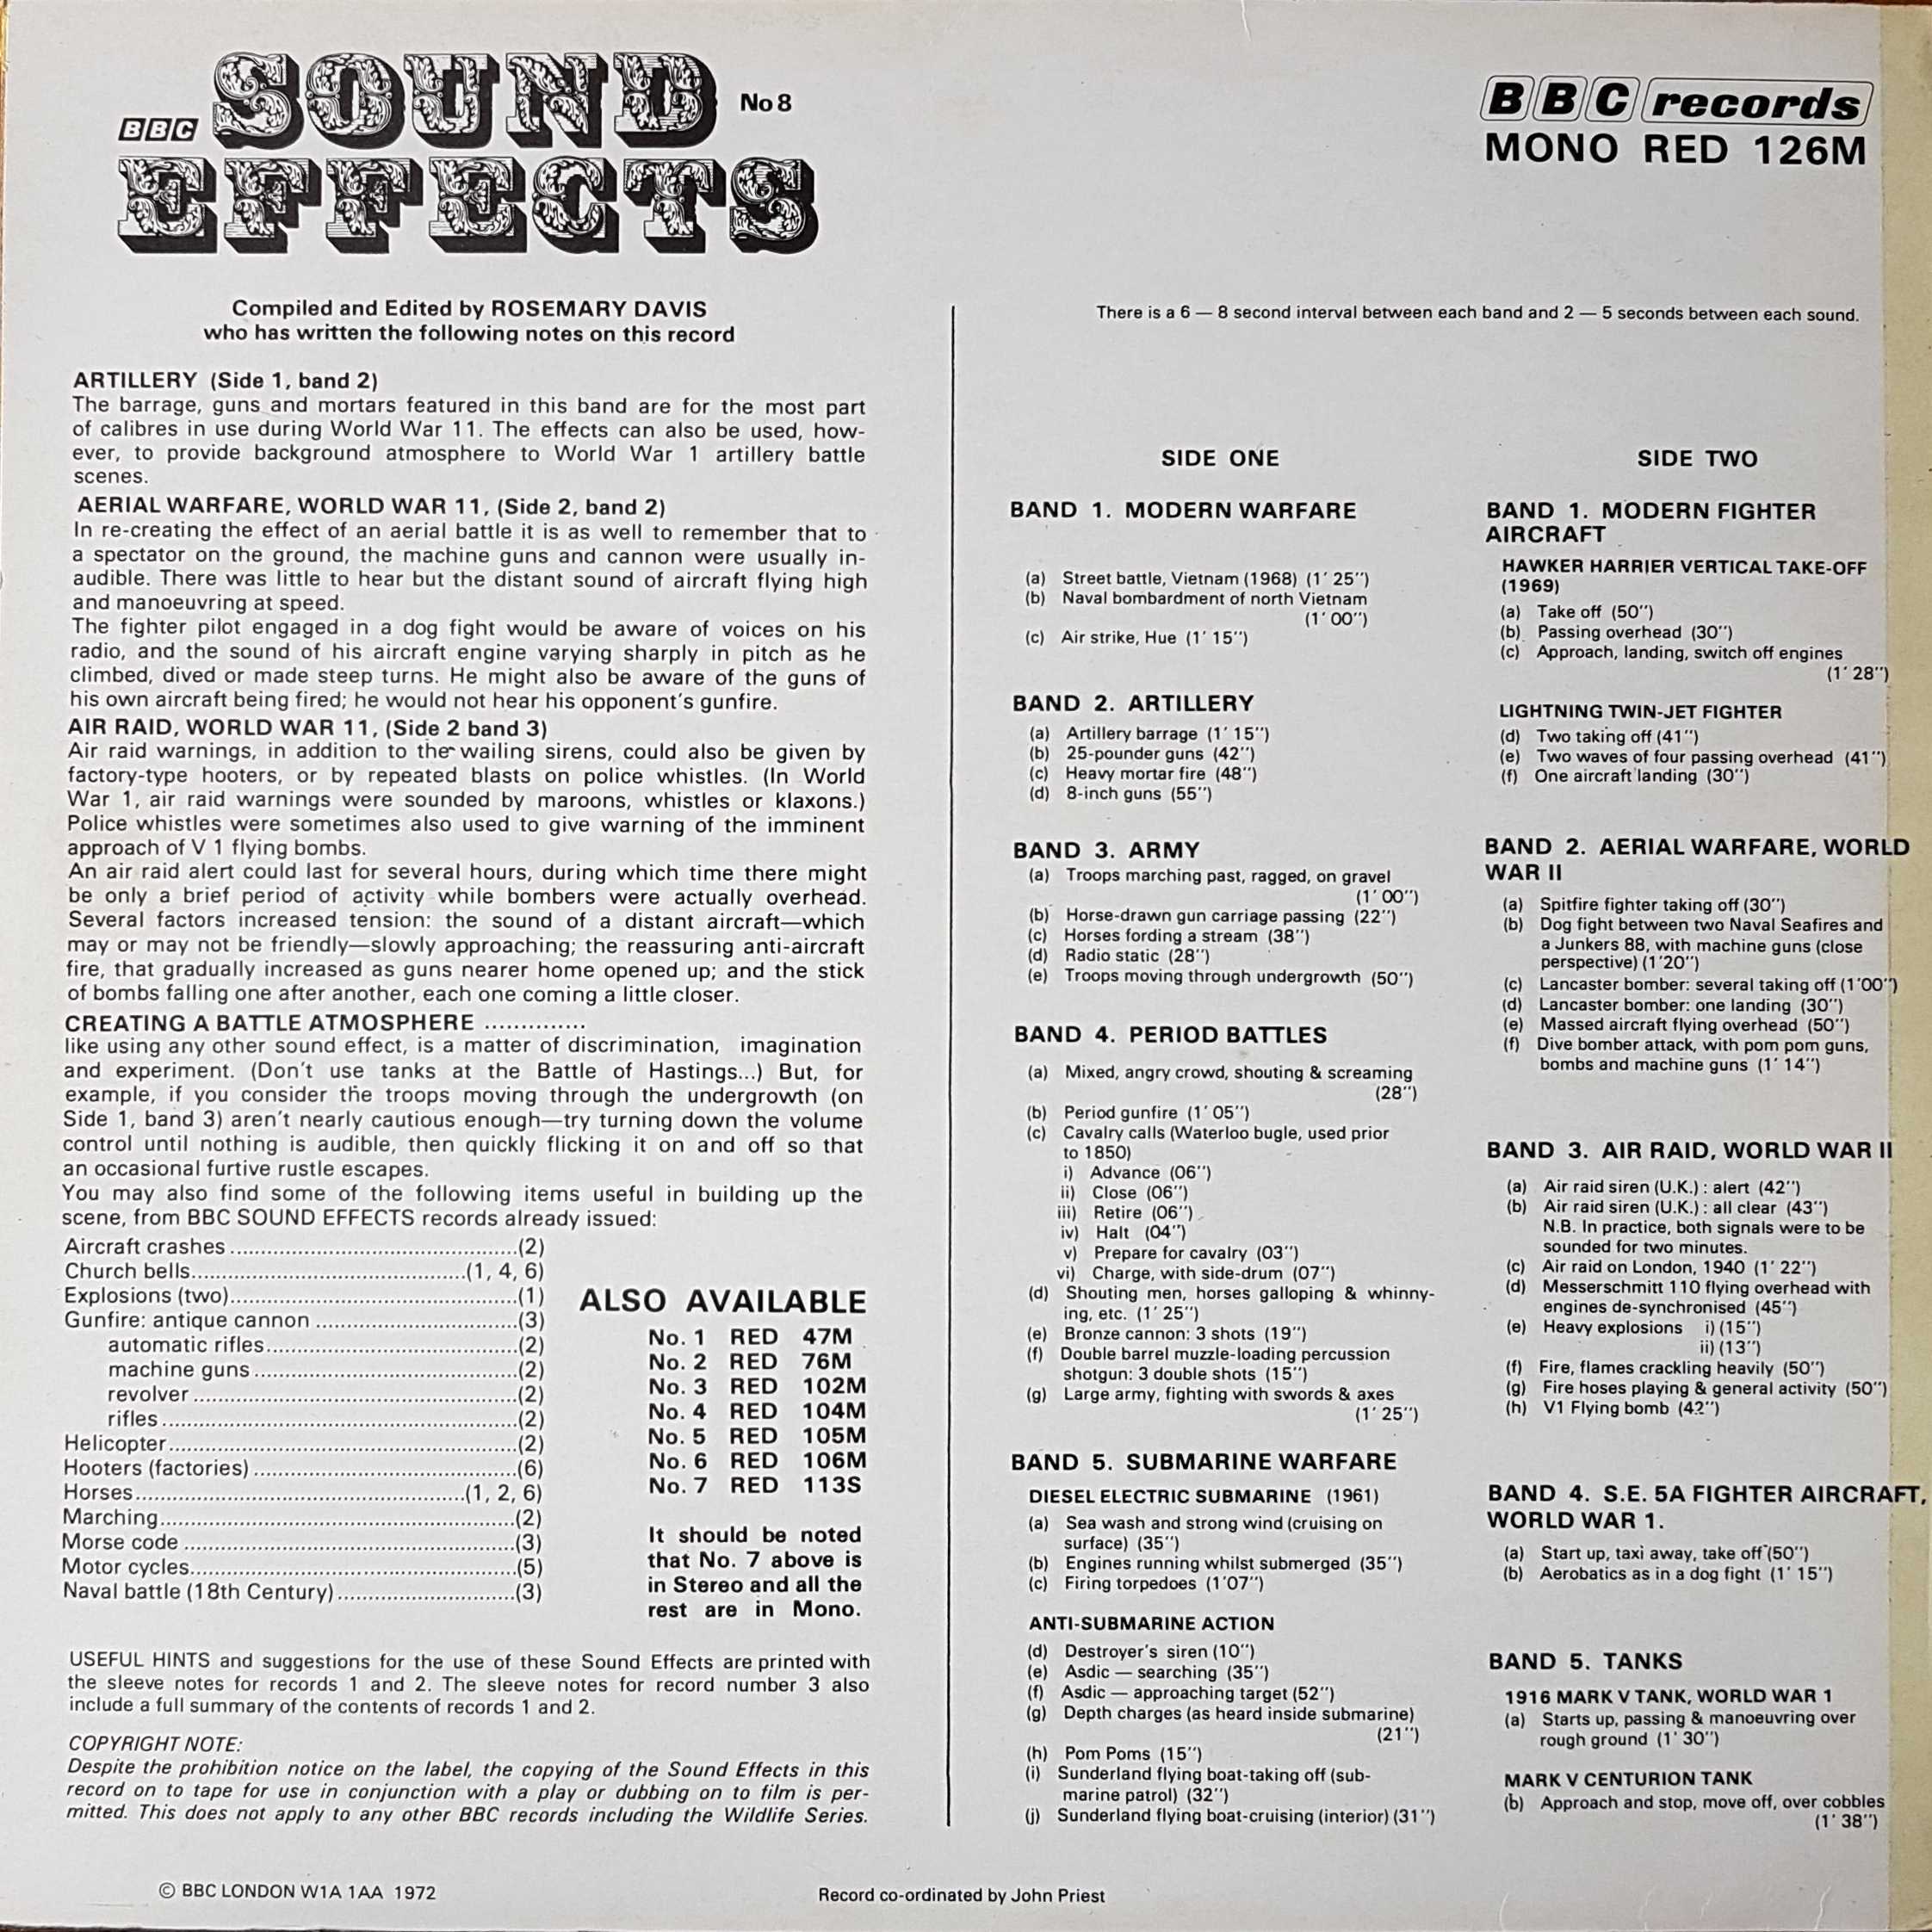 Picture of RED 126 Sound effects no. 8 by artist Various from the BBC records and Tapes library